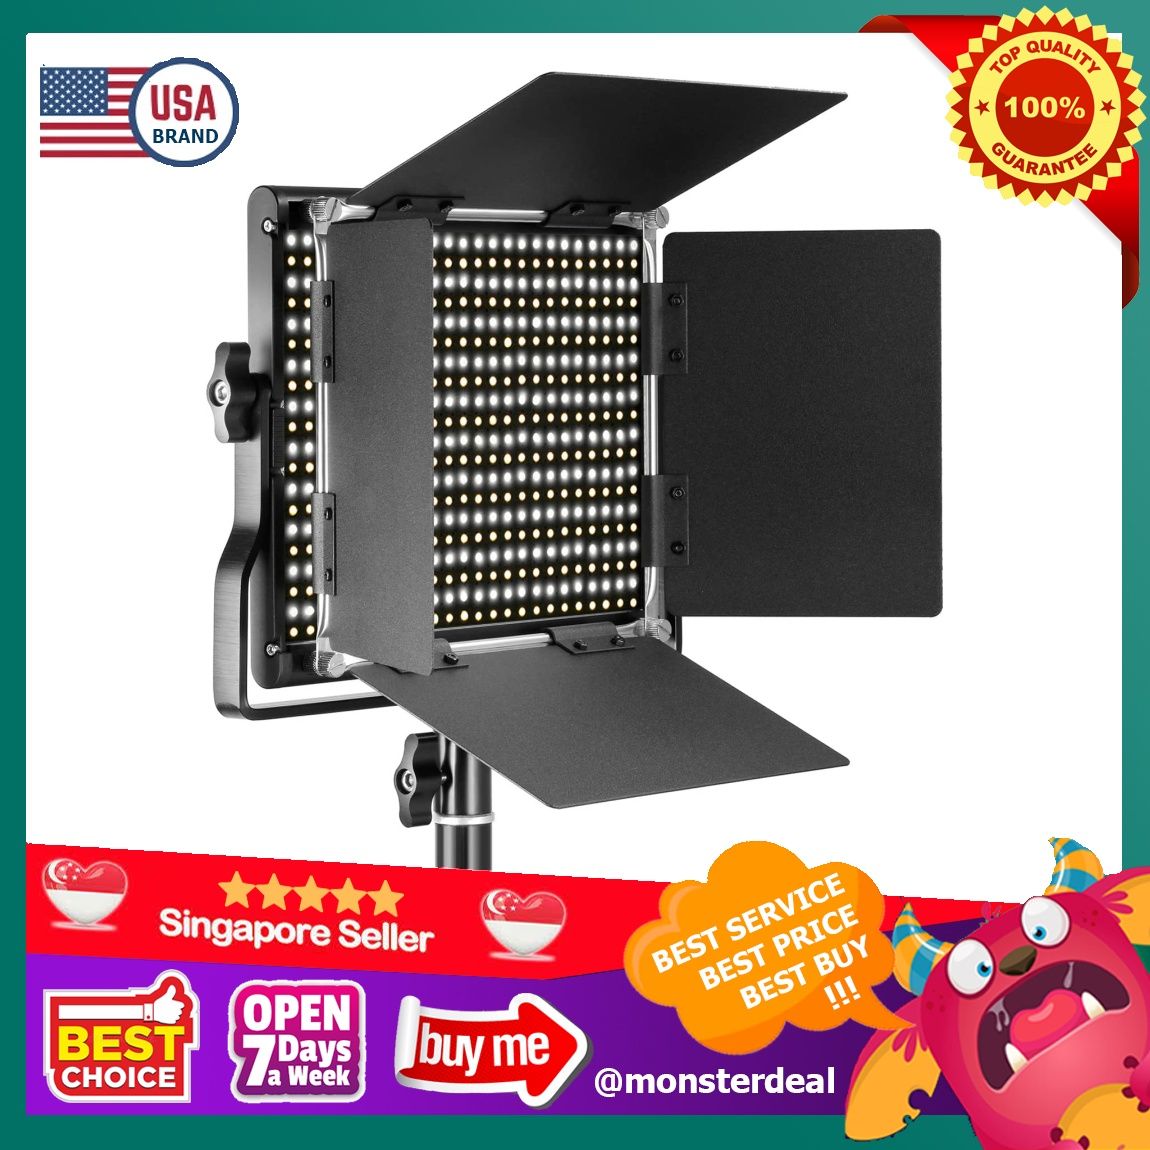 YBR] Neewer Professional Metal Bi-color LED Video Light for Studio, YouTube,  Product Photography, Video Shooting, Durable Metal Frame, Dimmable 660  Beads, with U Bracket and Barndoor, 3200-5600K, CRI 96+, Photography,  Photography Accessories,